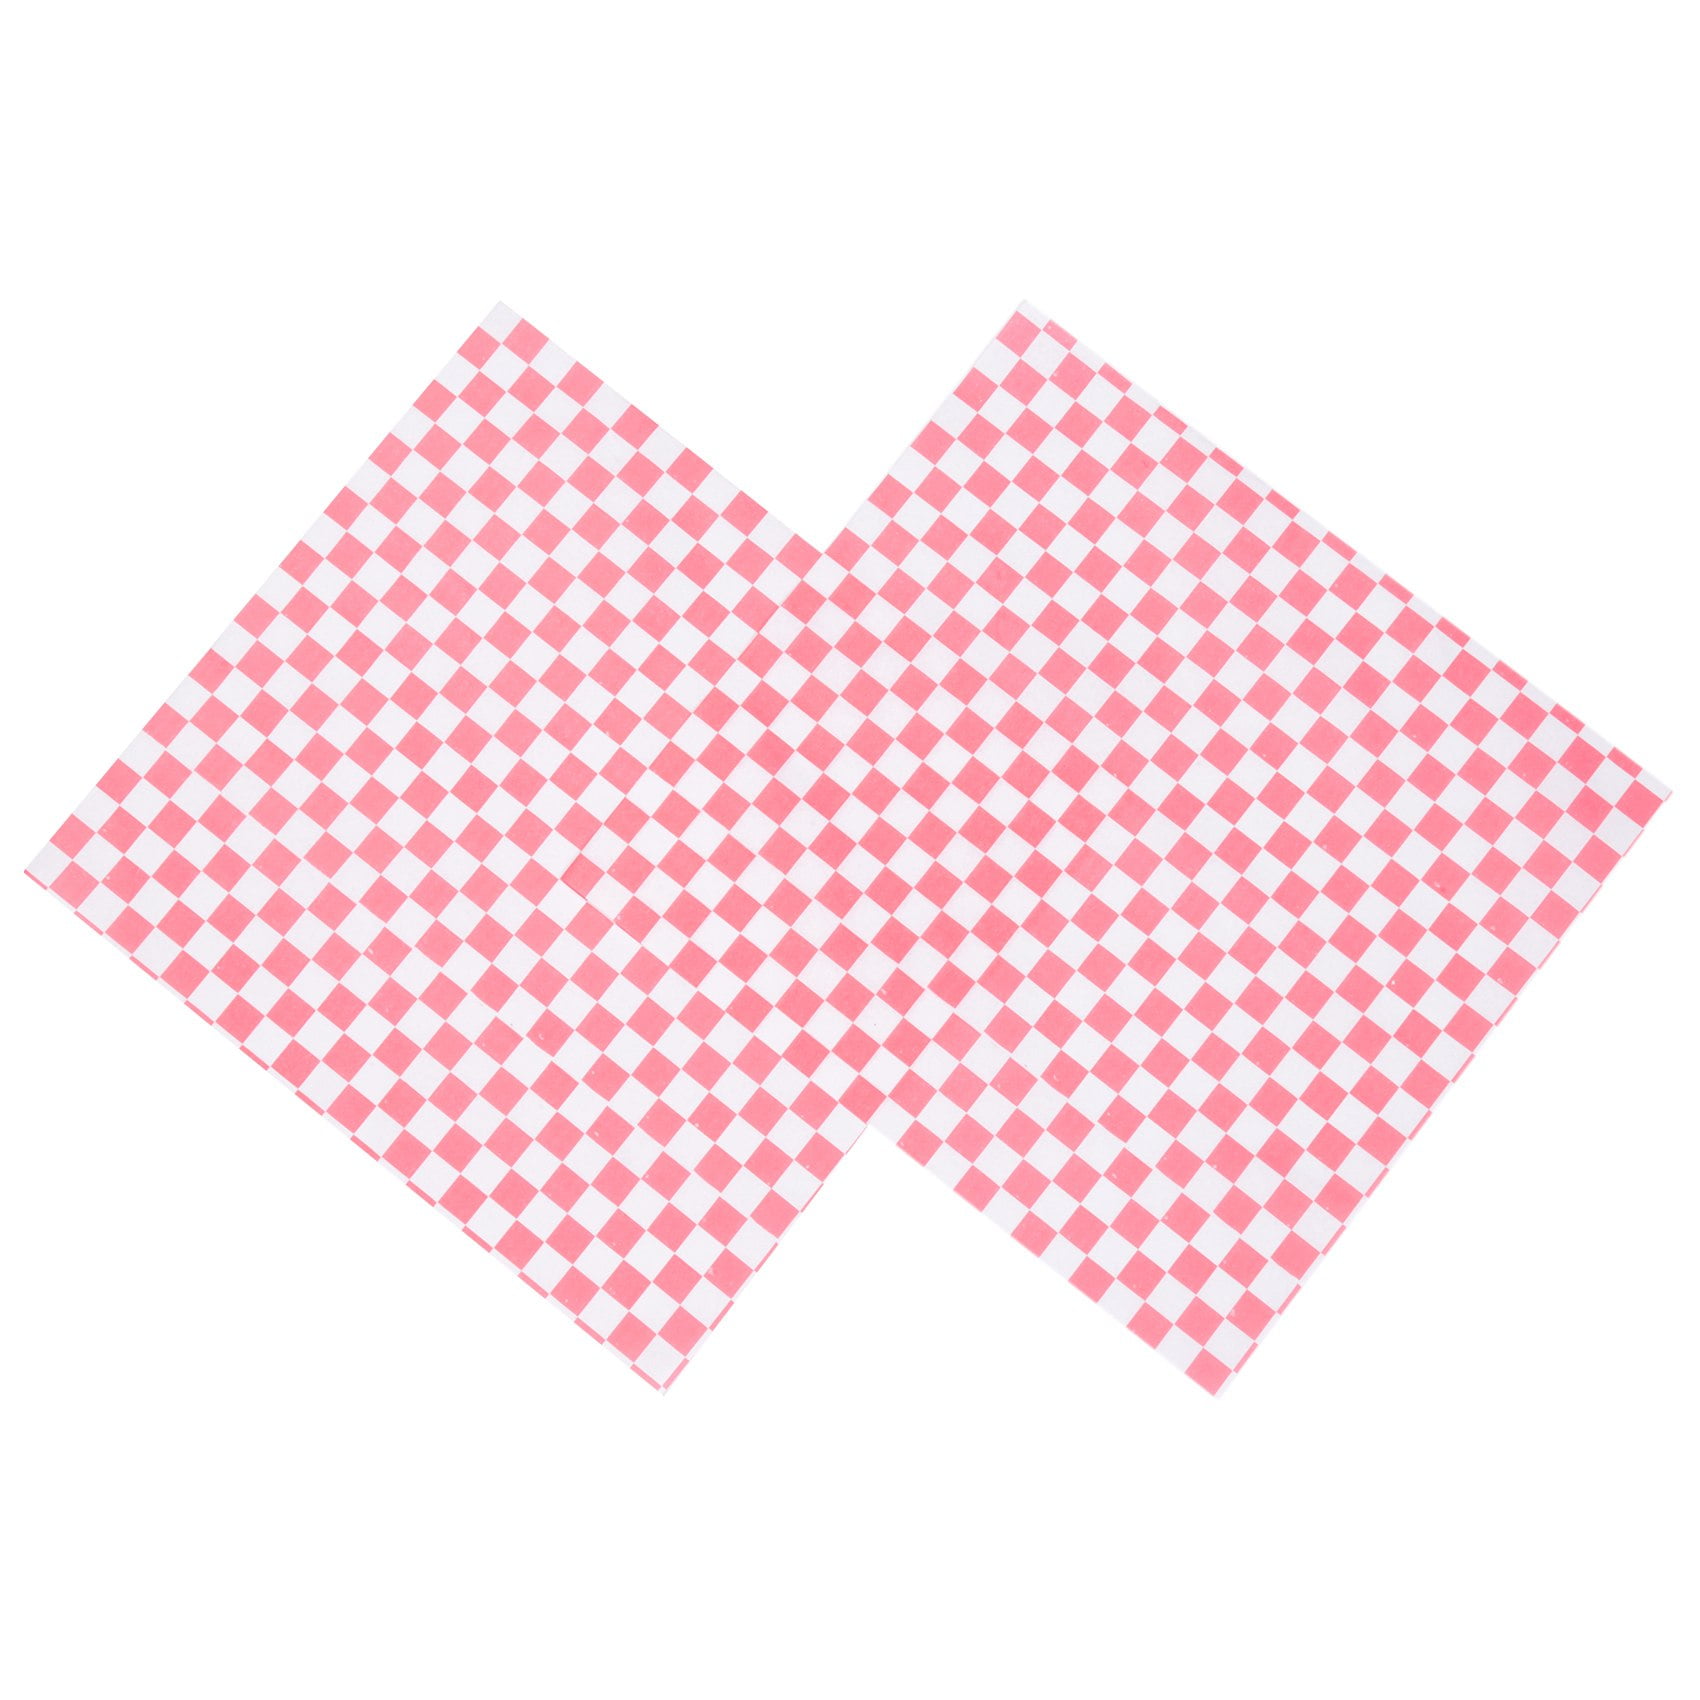 1X 100 PCS checkered deli candy basket liner Food Wrap Papers,Fat Repellen Z6N7 